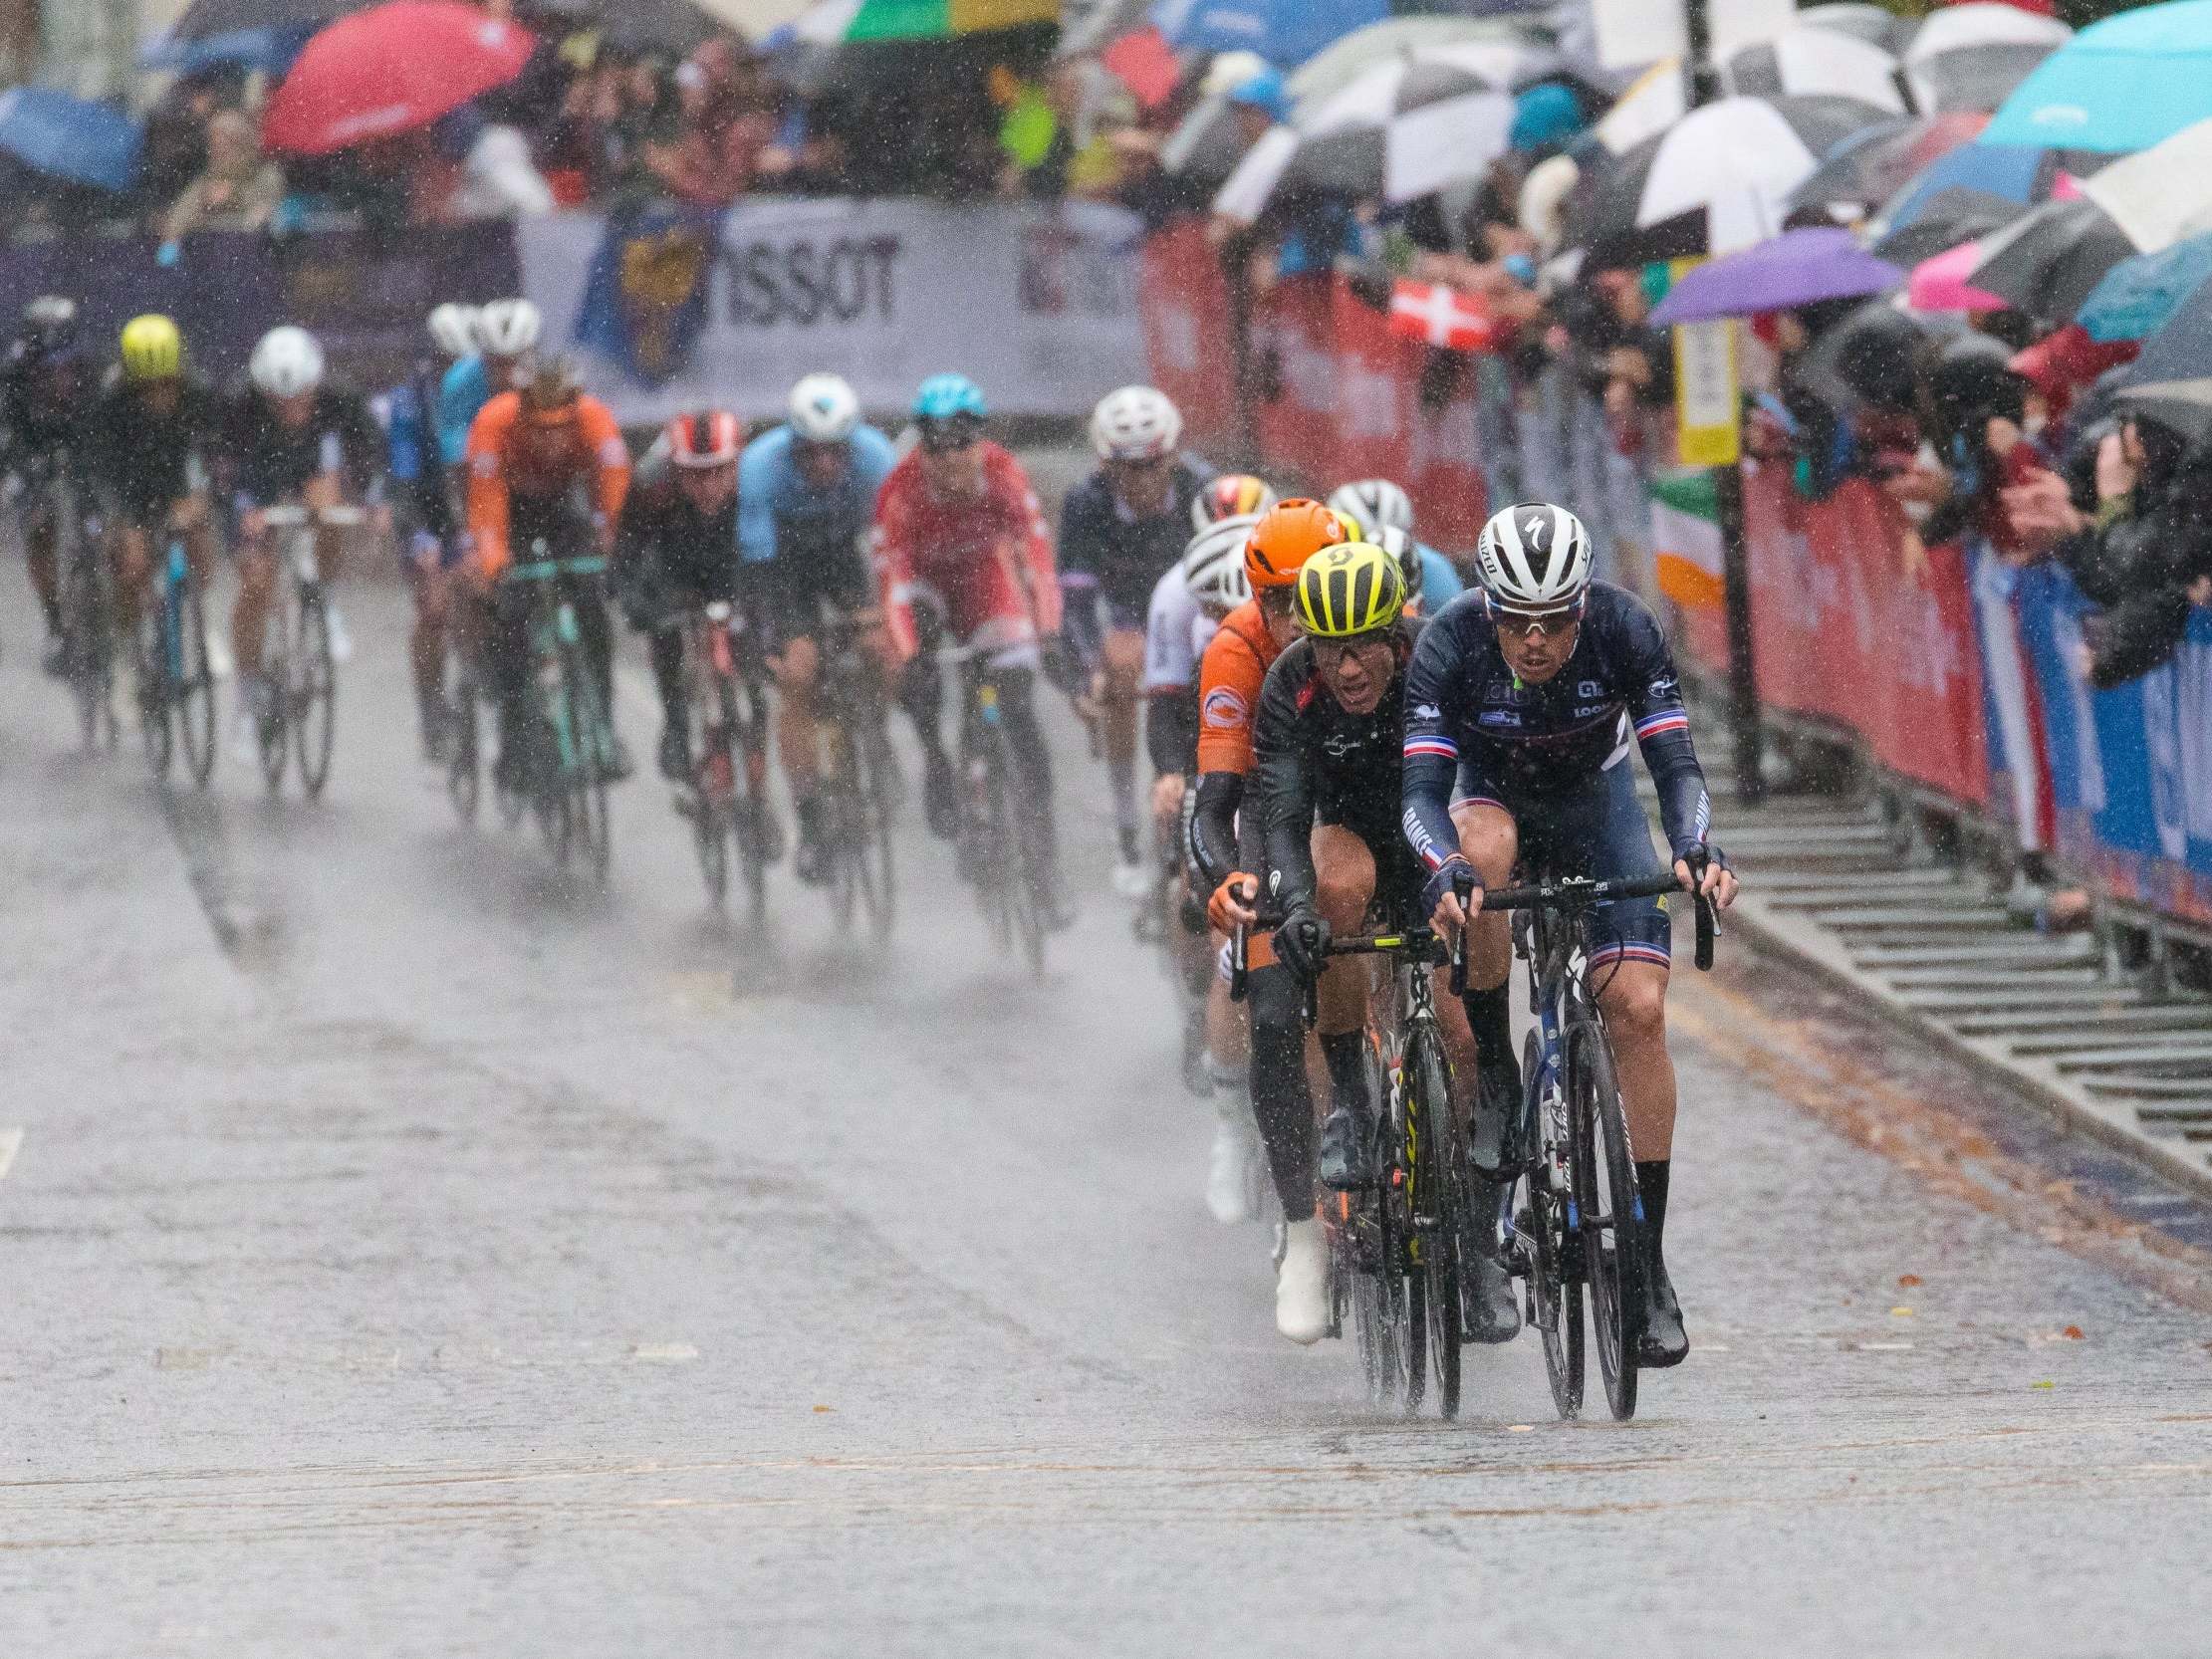 Cyclists endured appalling conditions in Yorkshire on Sunday during the world championship road race from Leeds to Harrogate